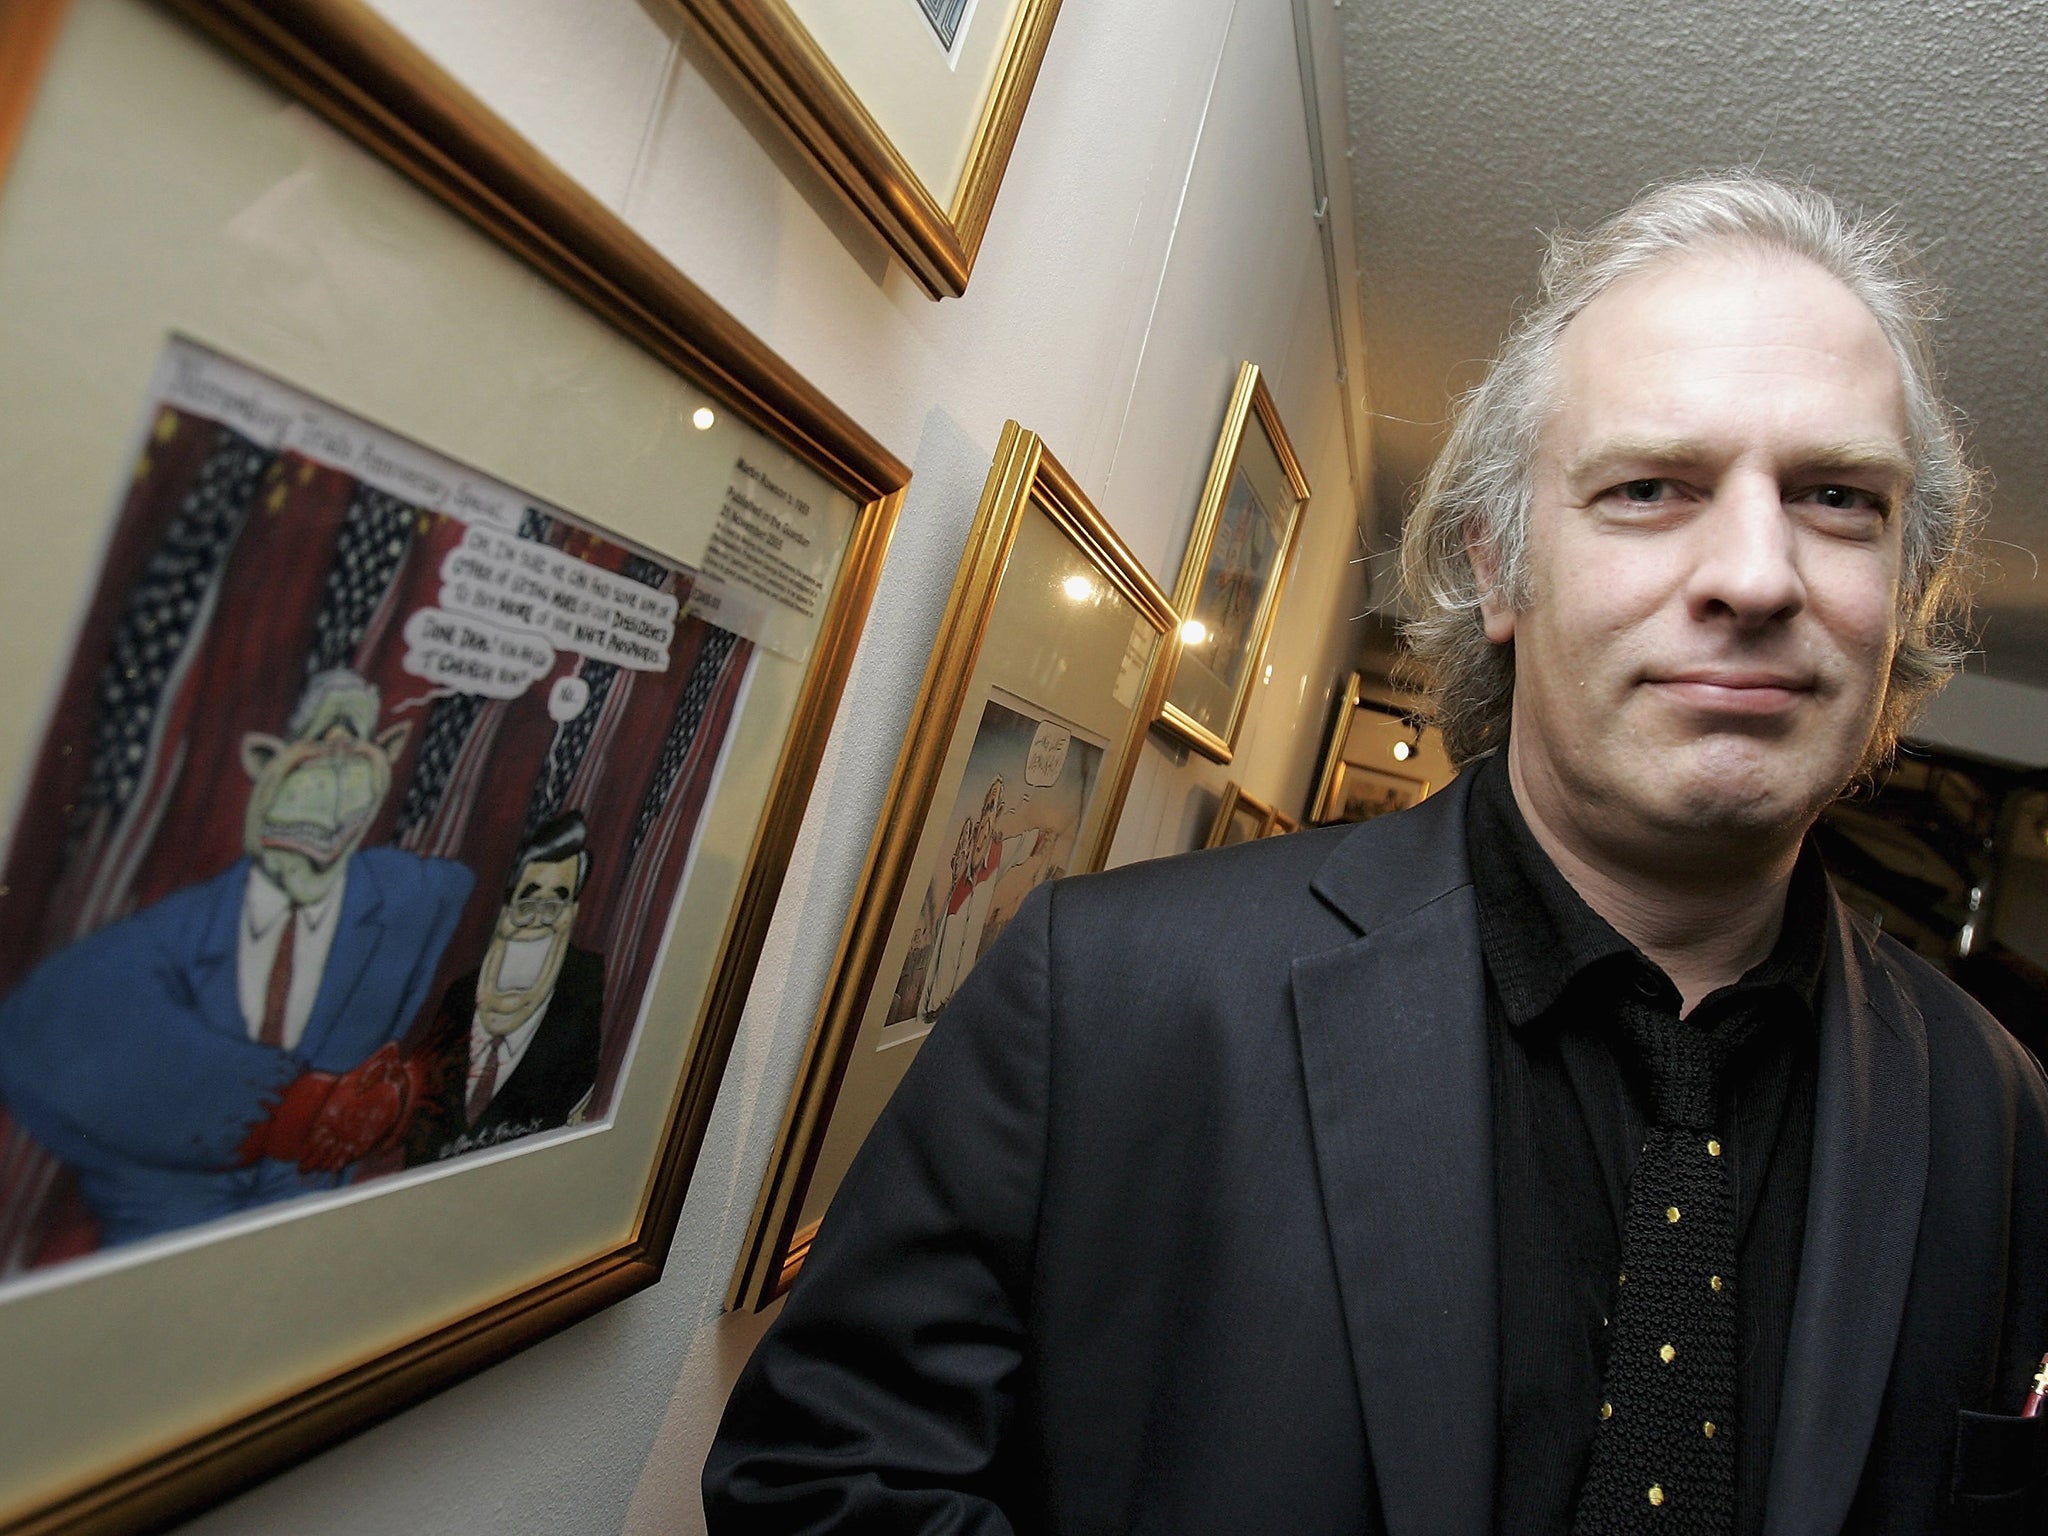 Cartoonist Martin Rowson poses with one of his cartoons at the Private View for "Misunderestimating The President Through Cartoons", an exhibition of caricatures of the President by leading UK and US political artists, at the Political Cartoon Gallery on